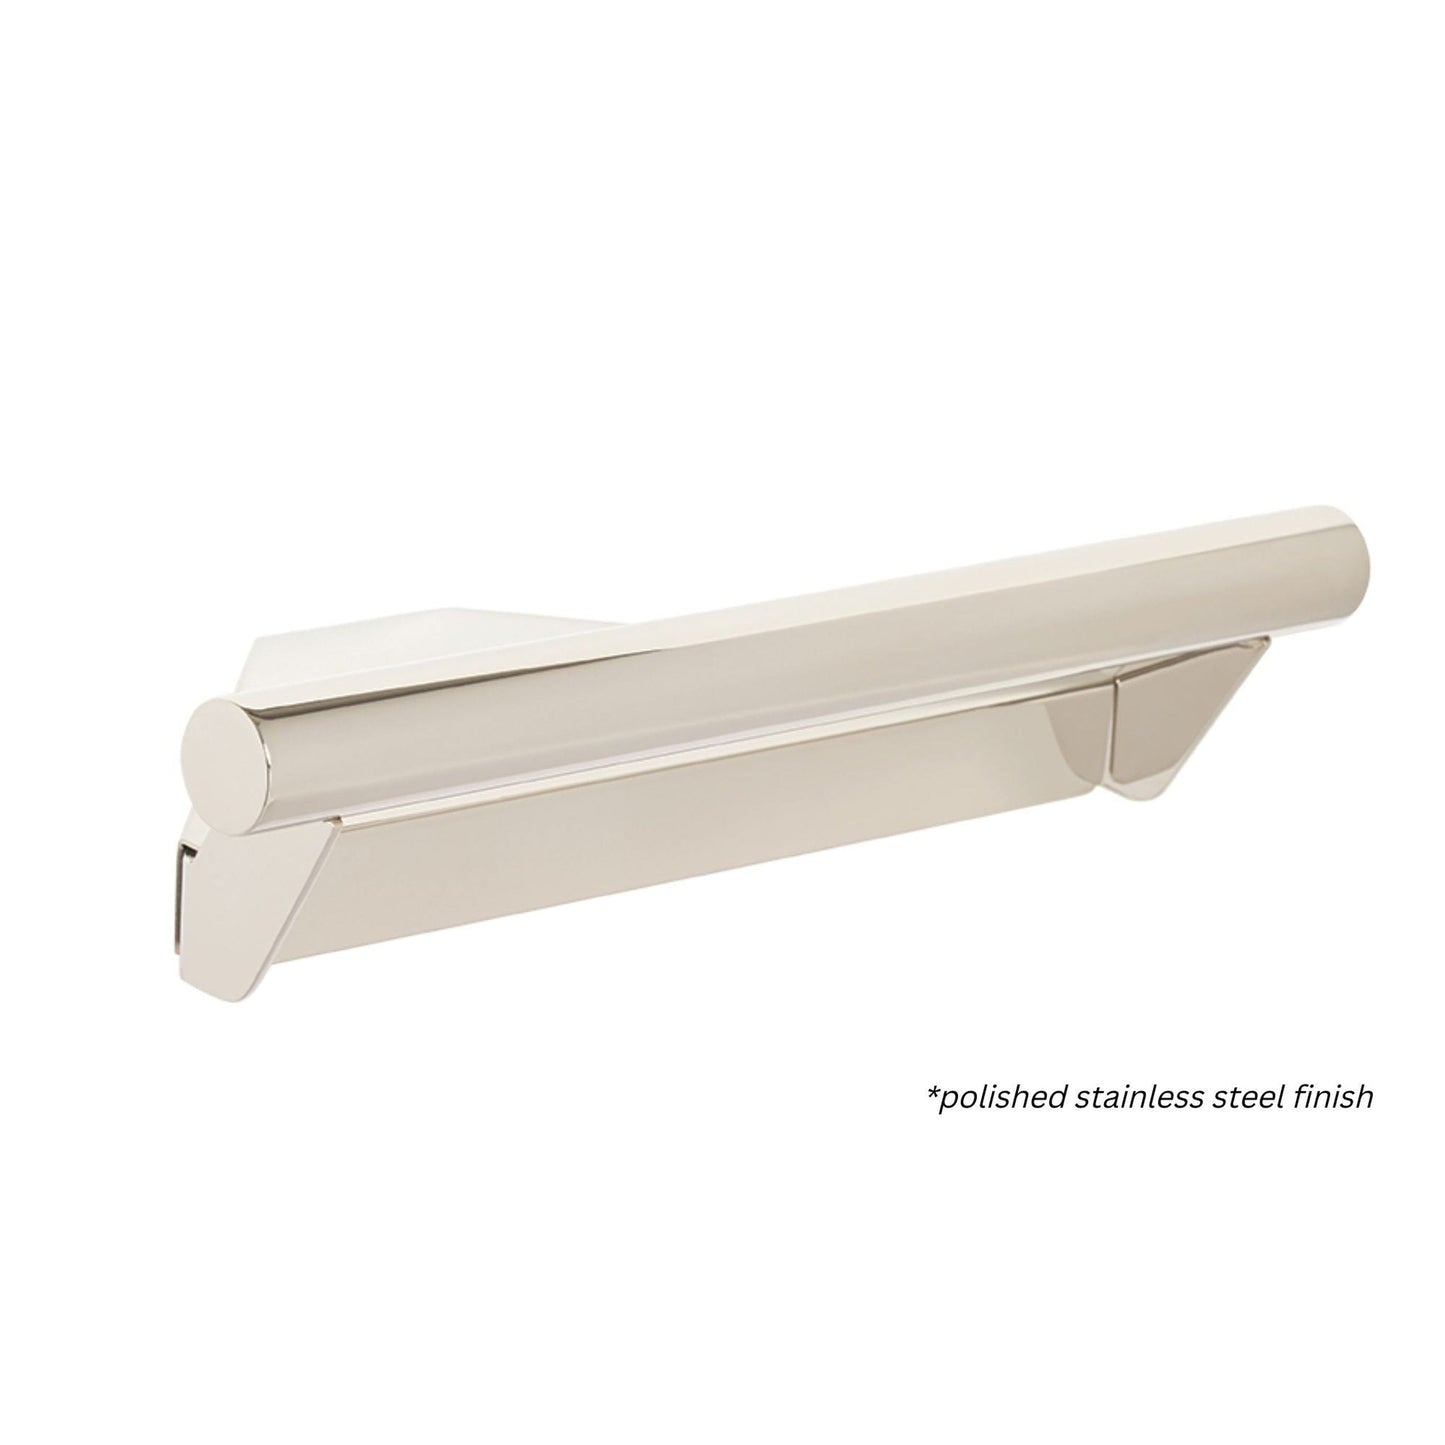 Seachrome Lifestyle and Wellness Series 14" x 8.5" Corner Shower Shelf With Handle in White Wrinkle Powder Coated Stainless Finish